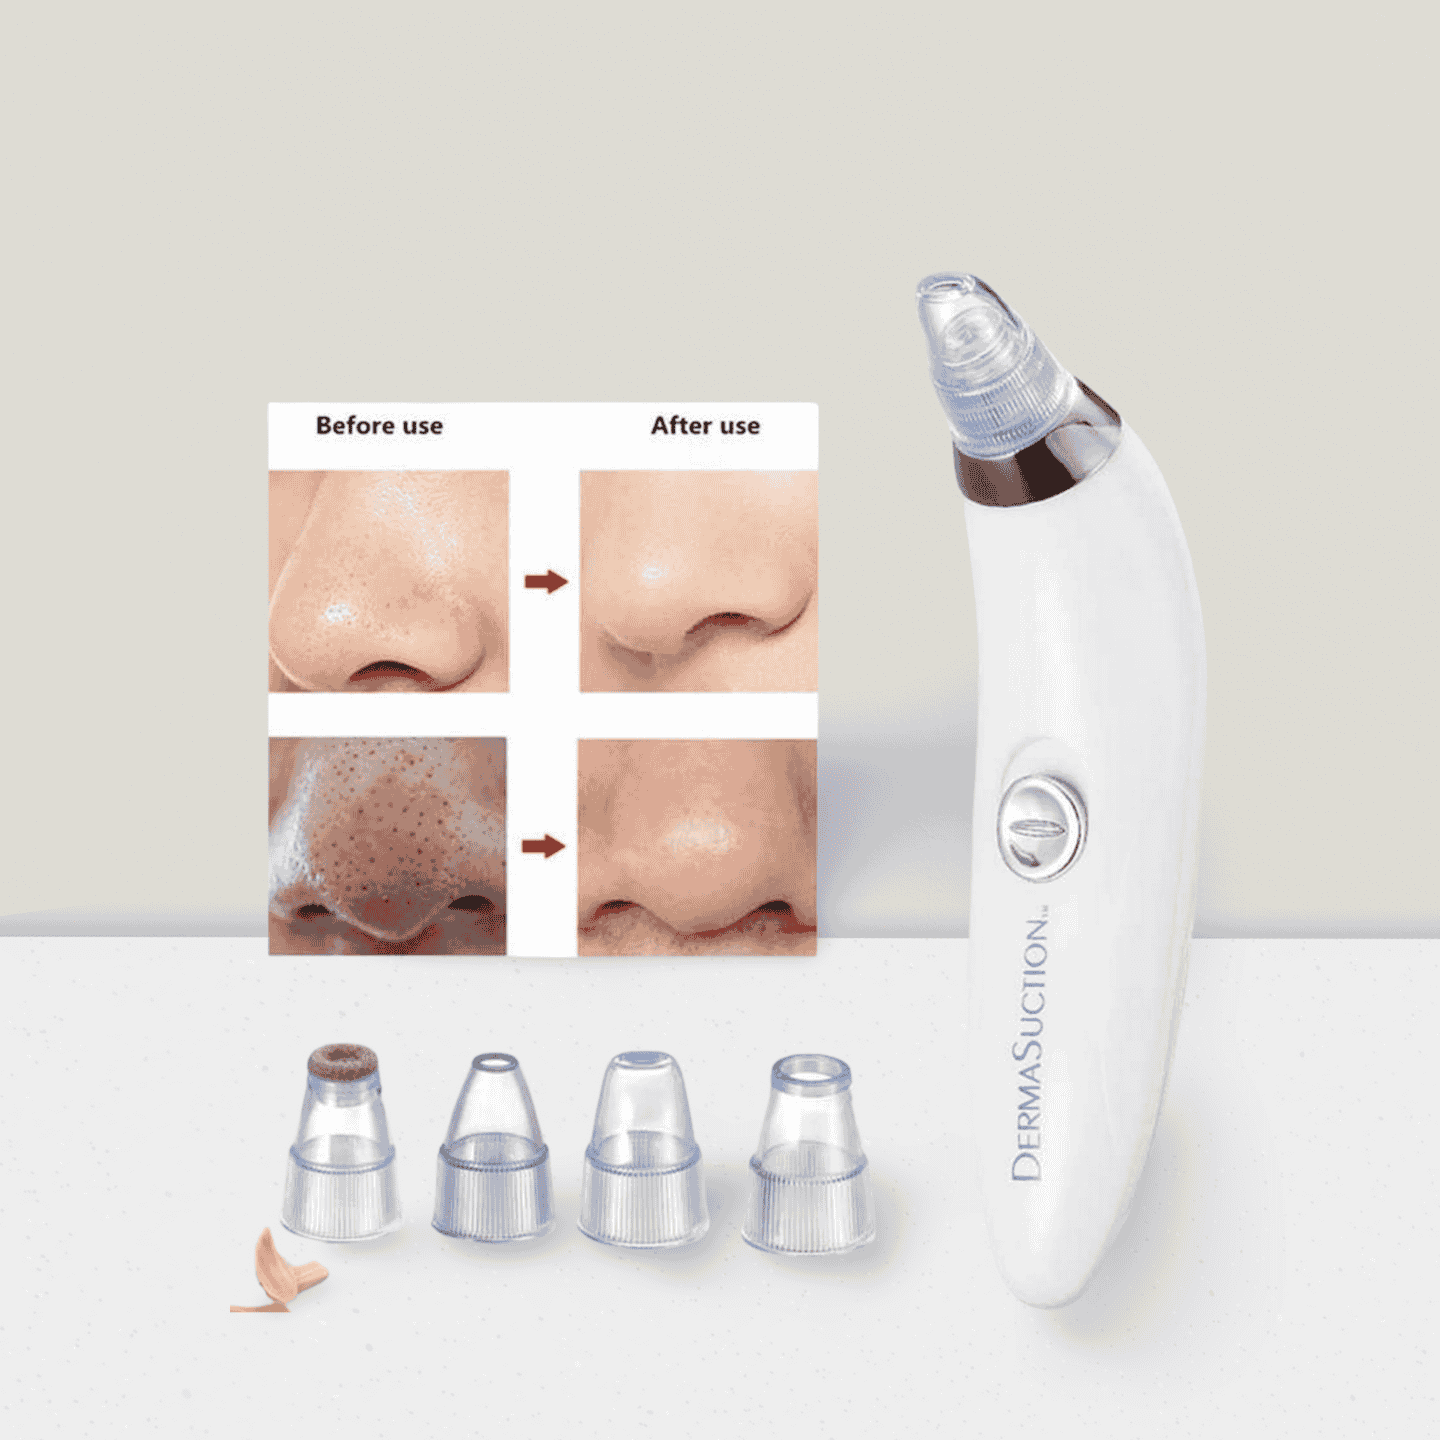 4 in 1 High Quality Black Head Remover Derma Suction - Shop Online